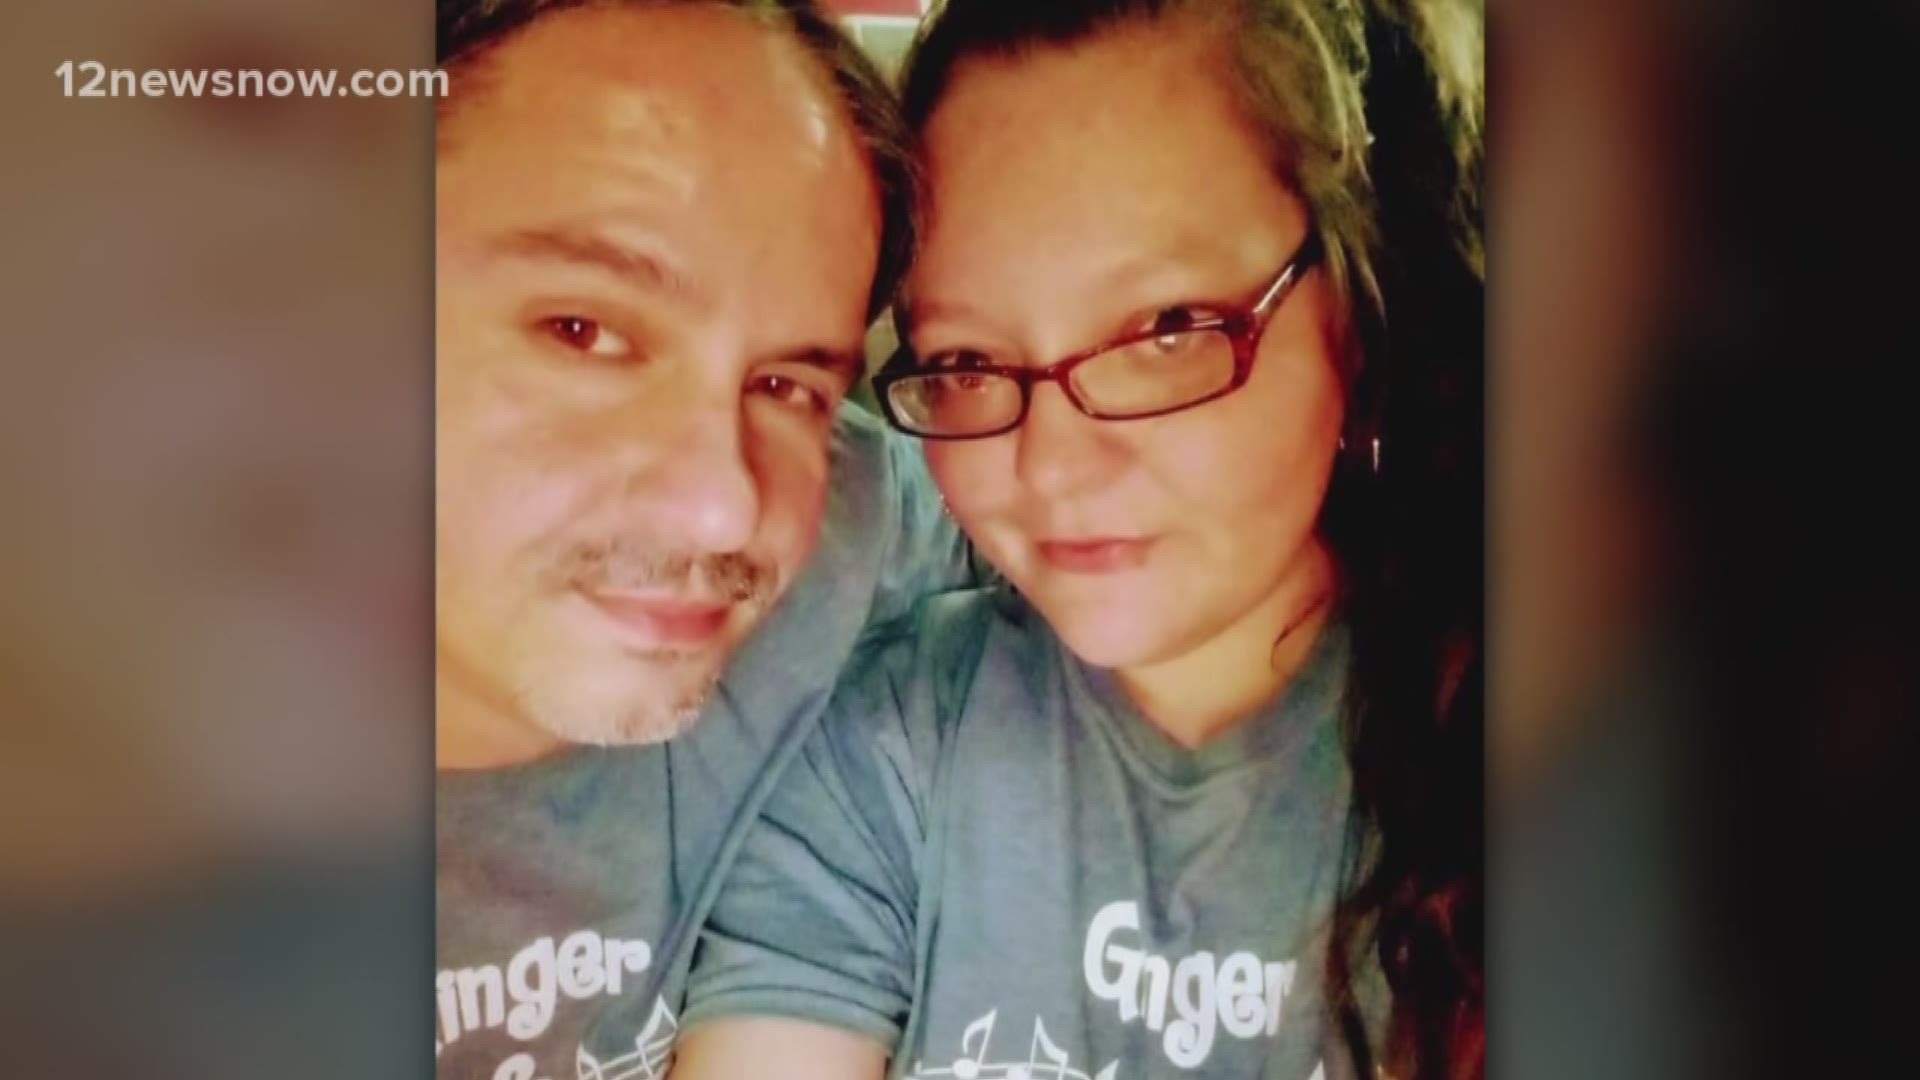 Johnny and Misty Buckley were killed by Carbon Monoxide poisoning according to family members.